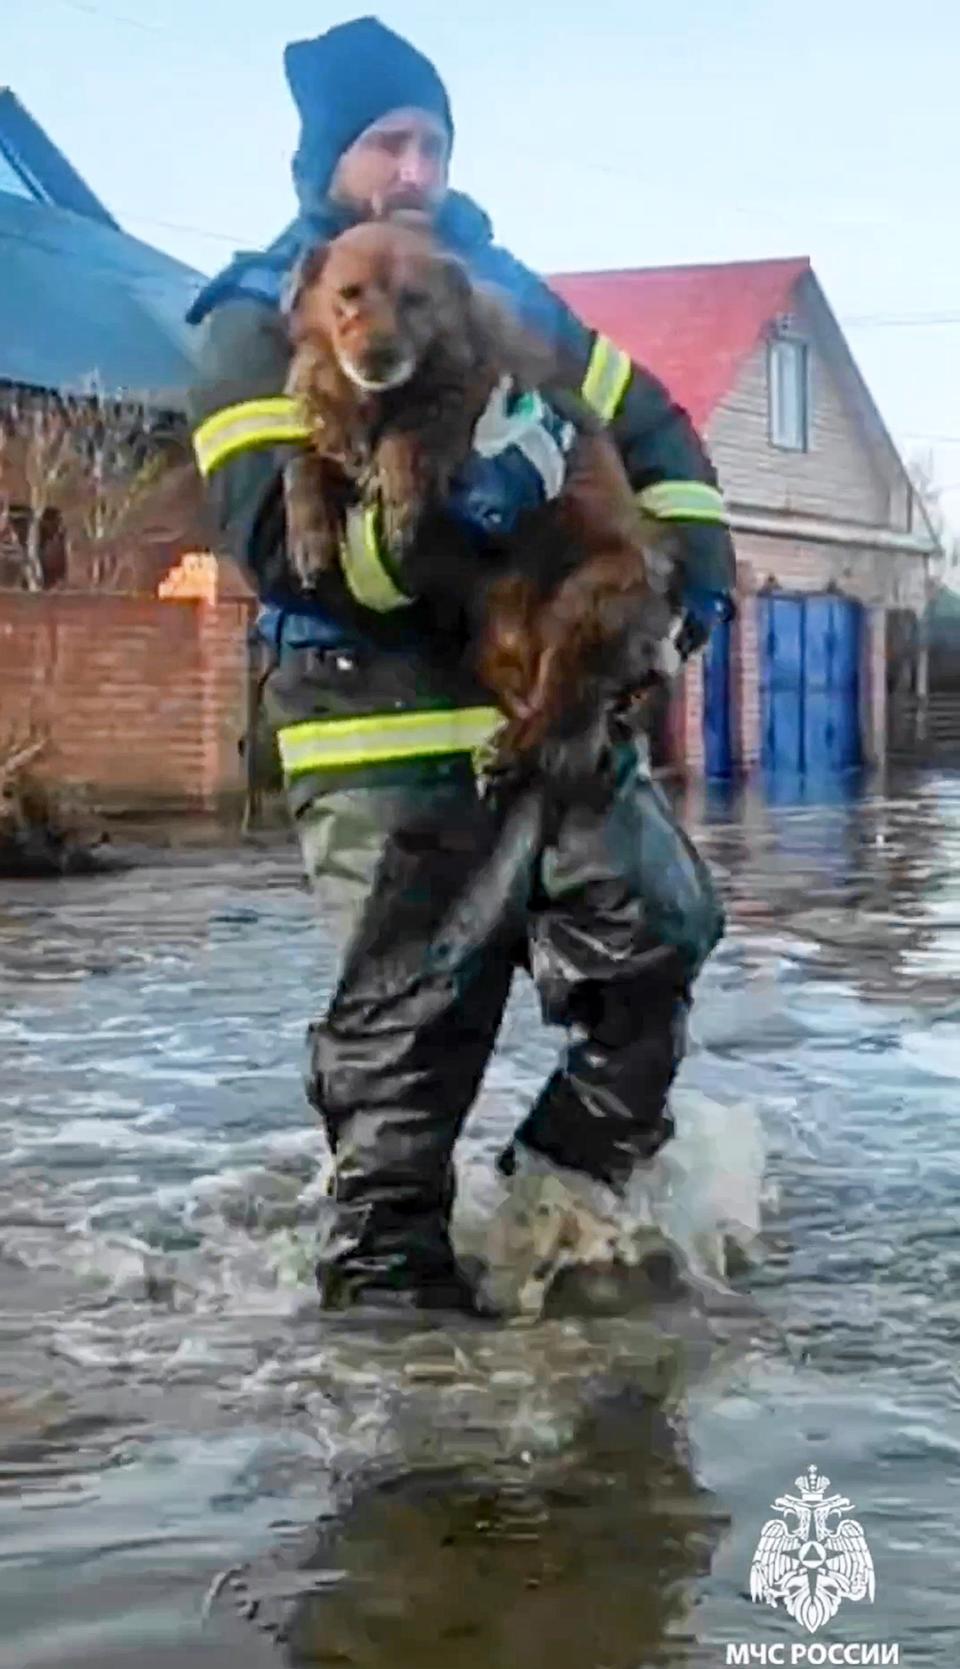 In this grab taken from a video released by the Russian Emergency Ministry Press Service on Saturday, April 6, 2024, a Russian Emergency Ministry worker carries a dog during an evacuation of local residents, after a part of a dam burst causing flooding, in Orsk, Russia. Floods hit a city in the Ural Mountains areas after a river dam burst there, prompting evacuations of hundreds of people, local authorities said. The dam breach in Orsk, a city less than 20 kilometers north of Russia's border with Kazakhstan, occurred on Friday night, according to Orsk mayor Vasily Kozupitsa. (Russian Emergency Ministry Press Service via AP)